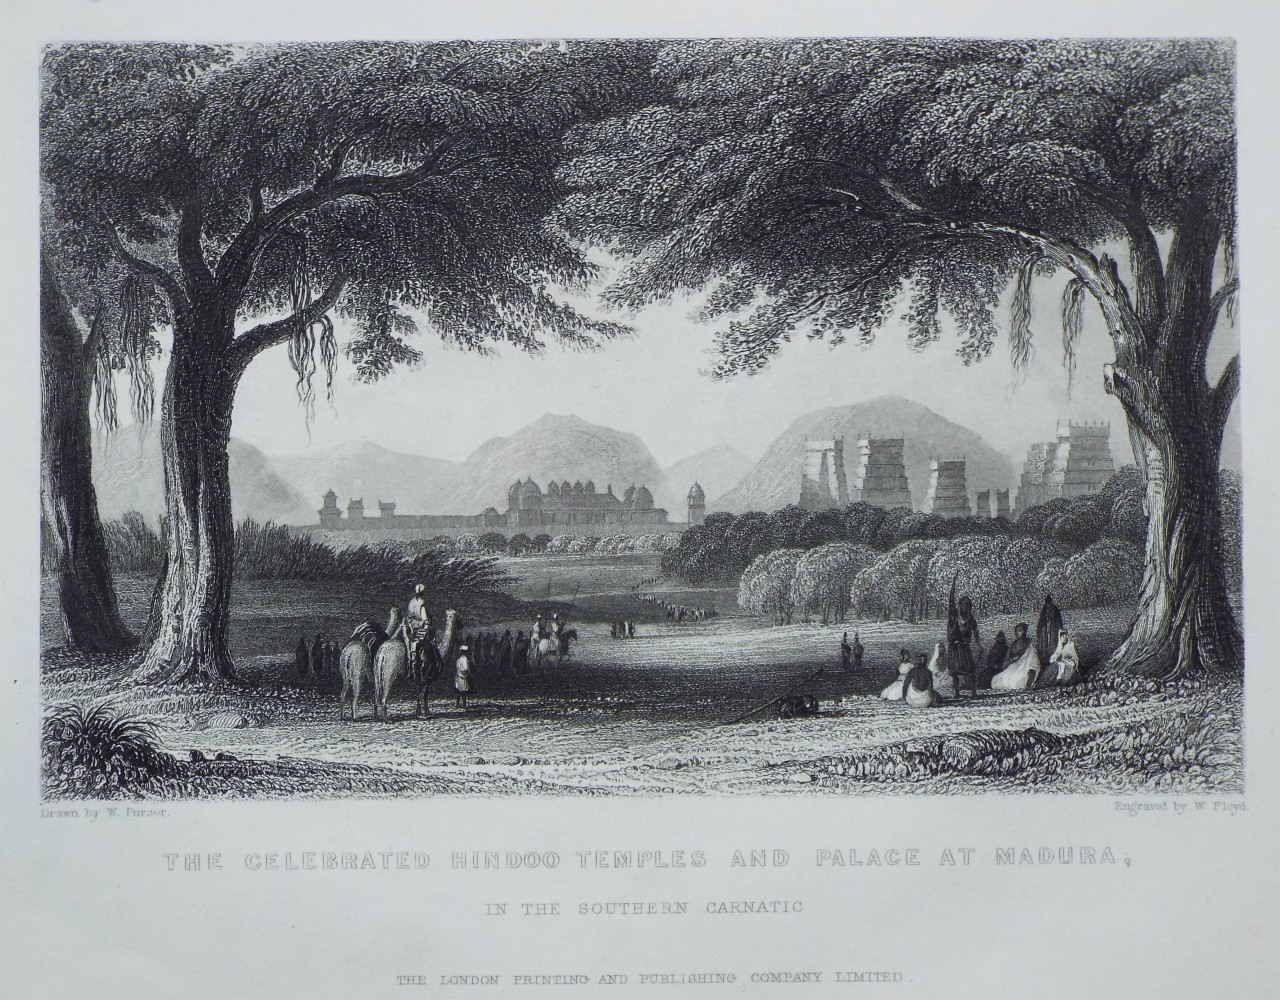 Print - The Celebrated Hindoo Temples and Palace at Madura, in the Southern Carnatic - Floyd